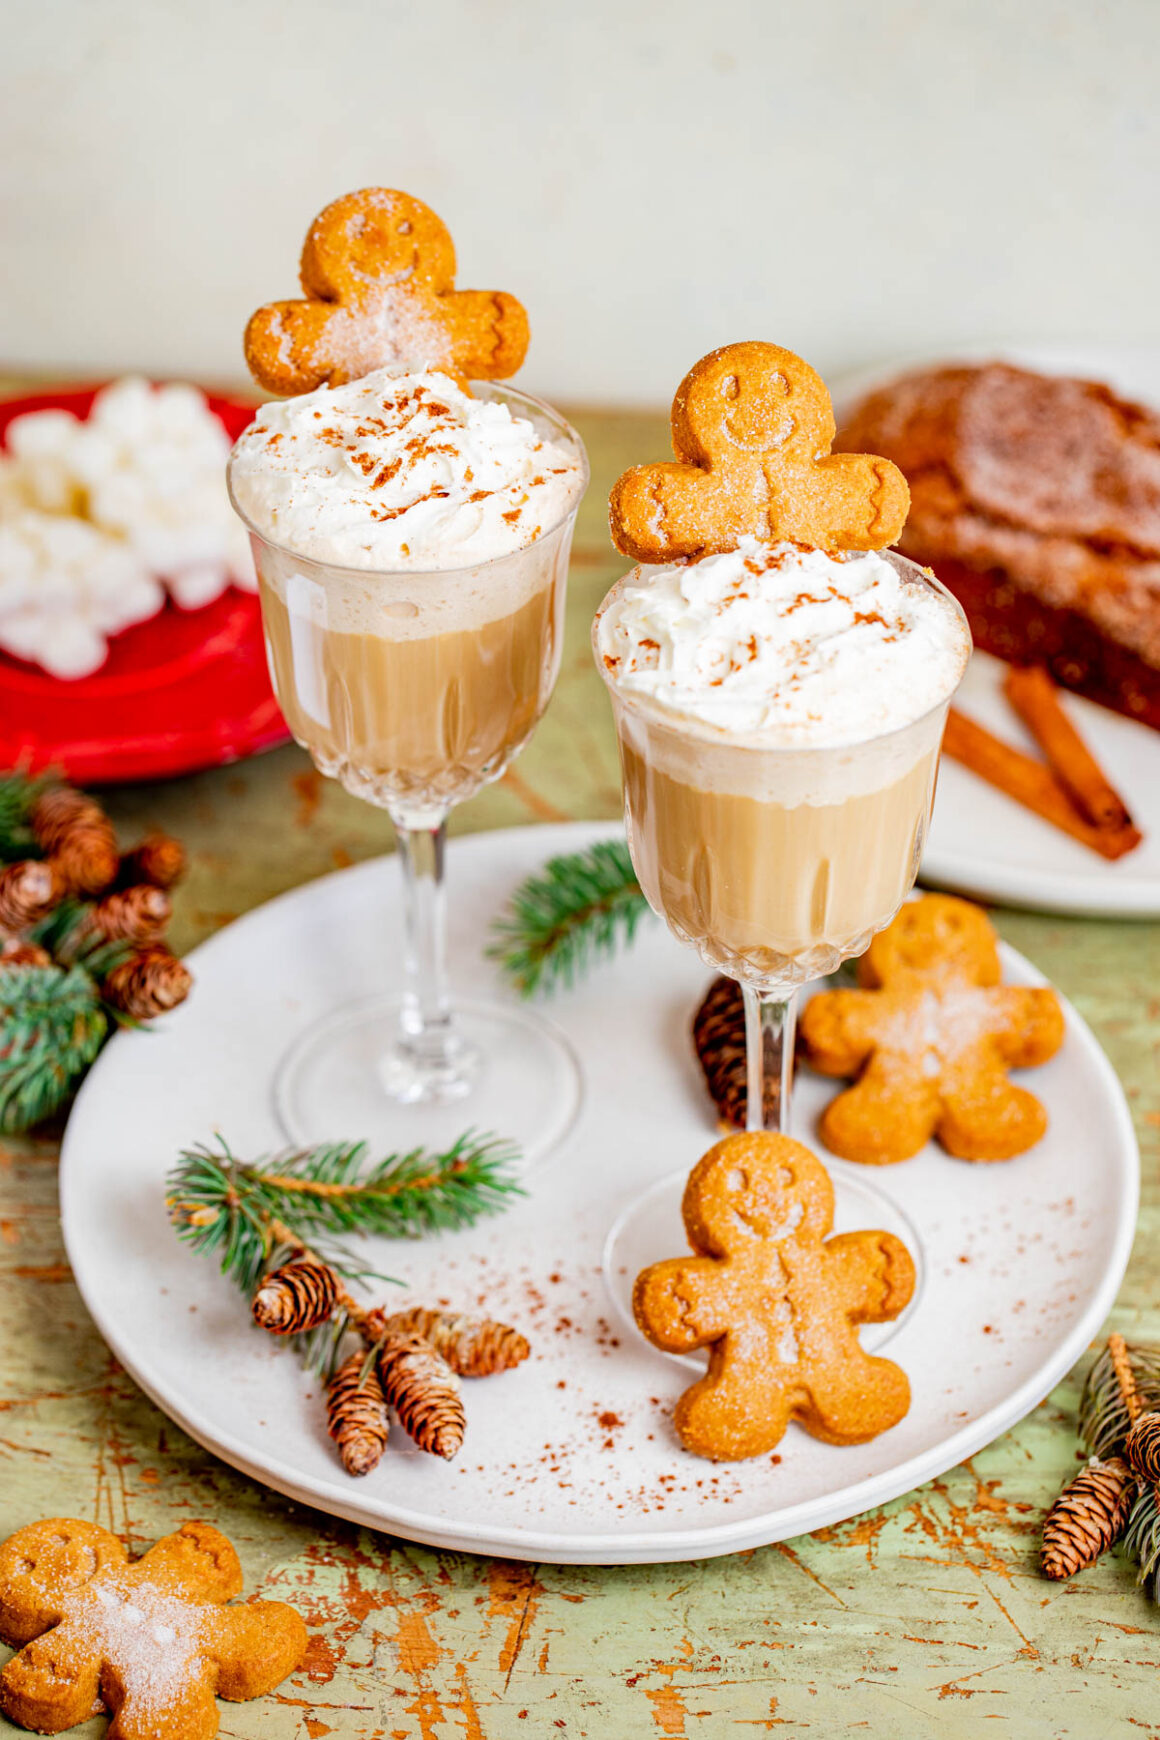 The hot coffee or espresso is then mixed with the gingerbread syrup, creating a harmonious blend of flavors.